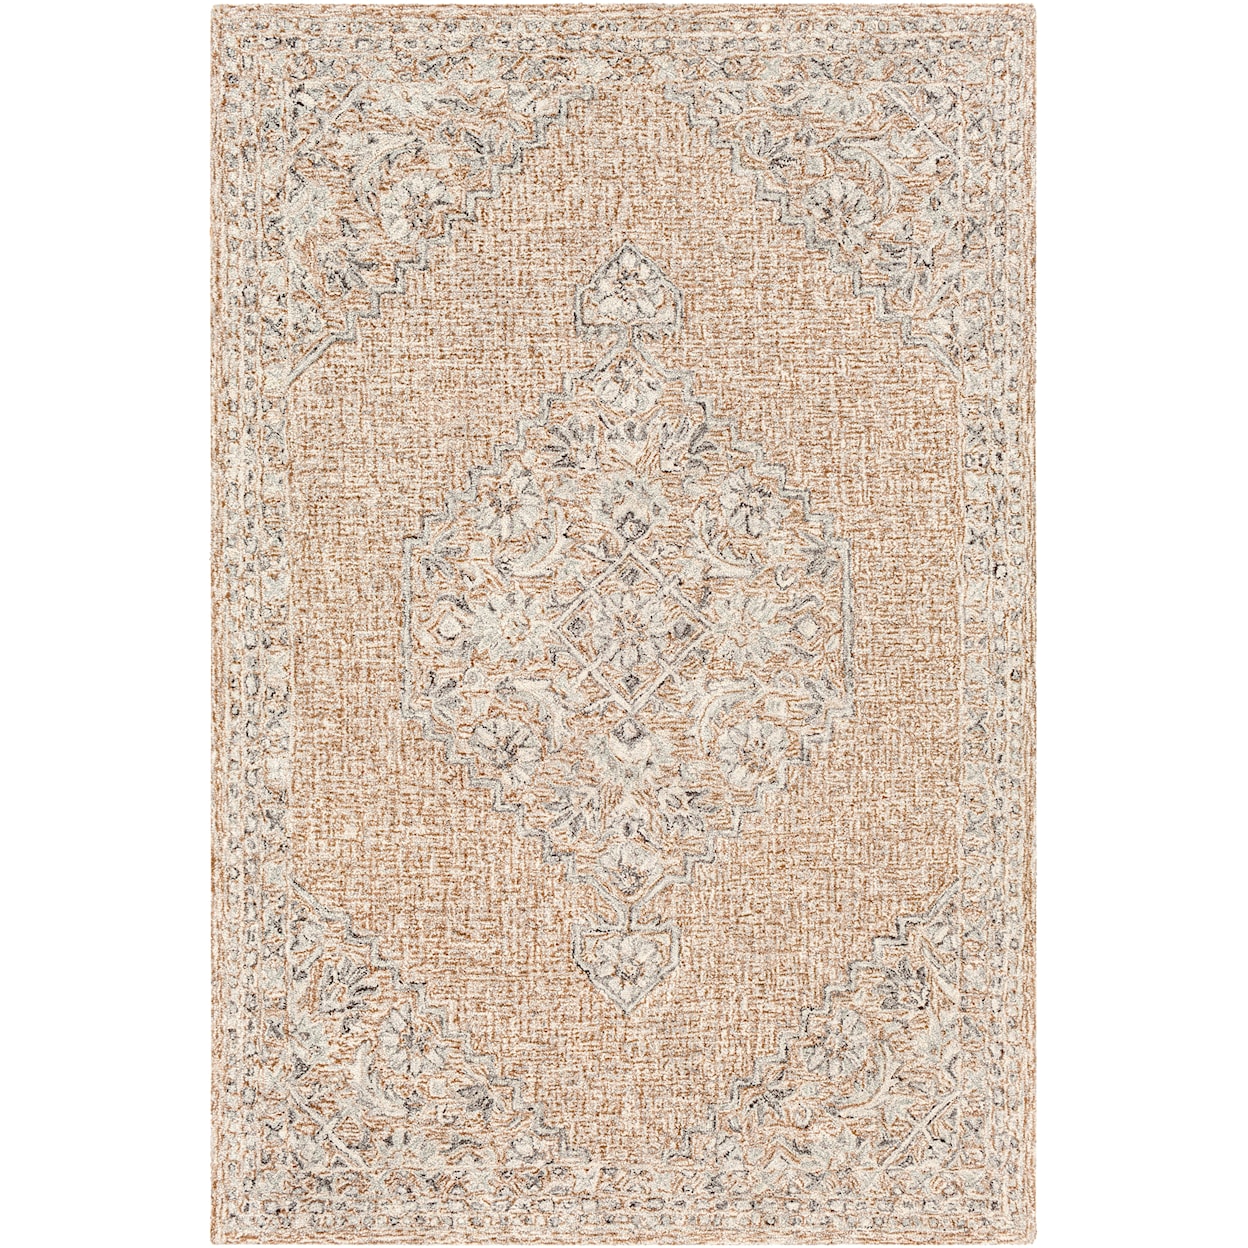 Ruby-Gordon Accents Symphony Rugs